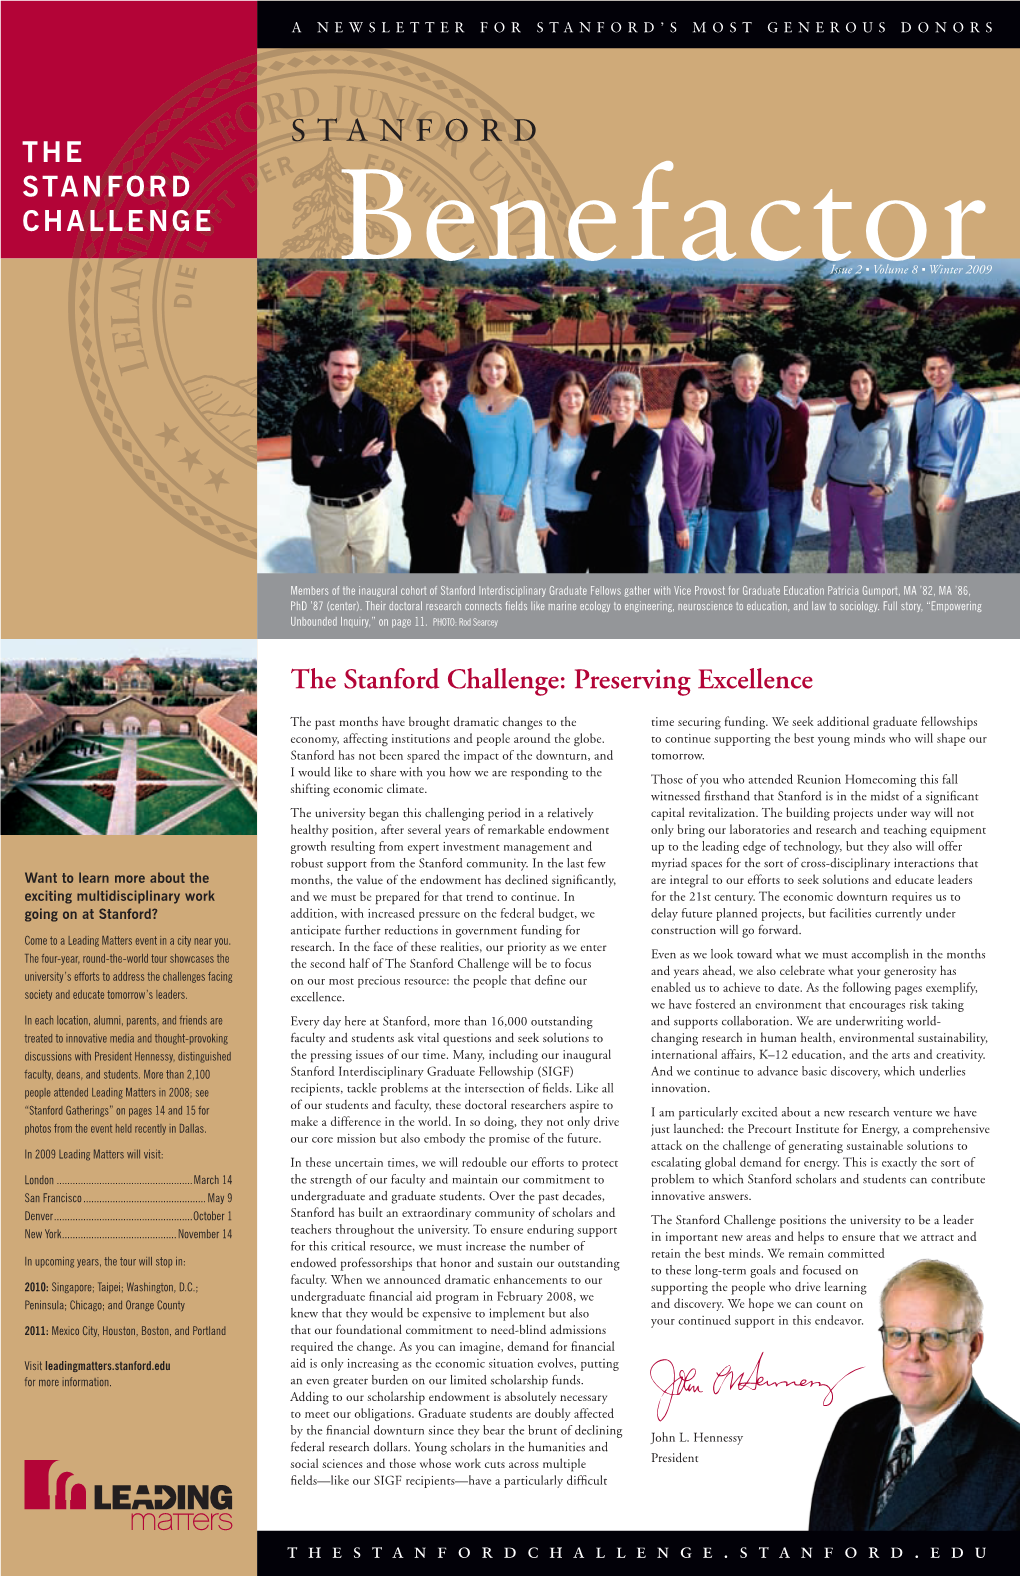 The Stanford Challenge: Preserving Excellence